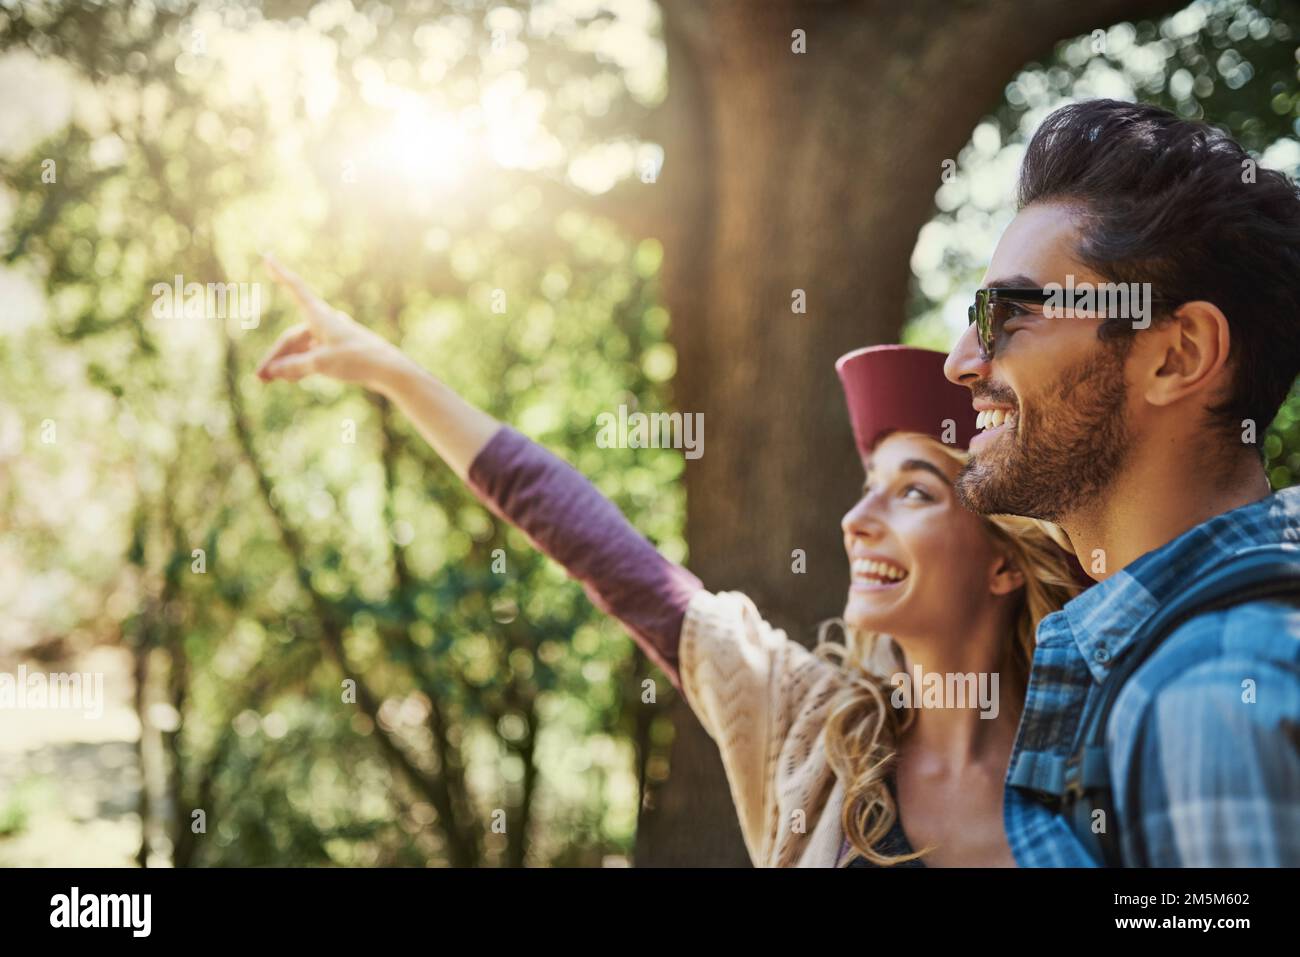 Do you see what I see. a happy young couple exploring nature together. Stock Photo